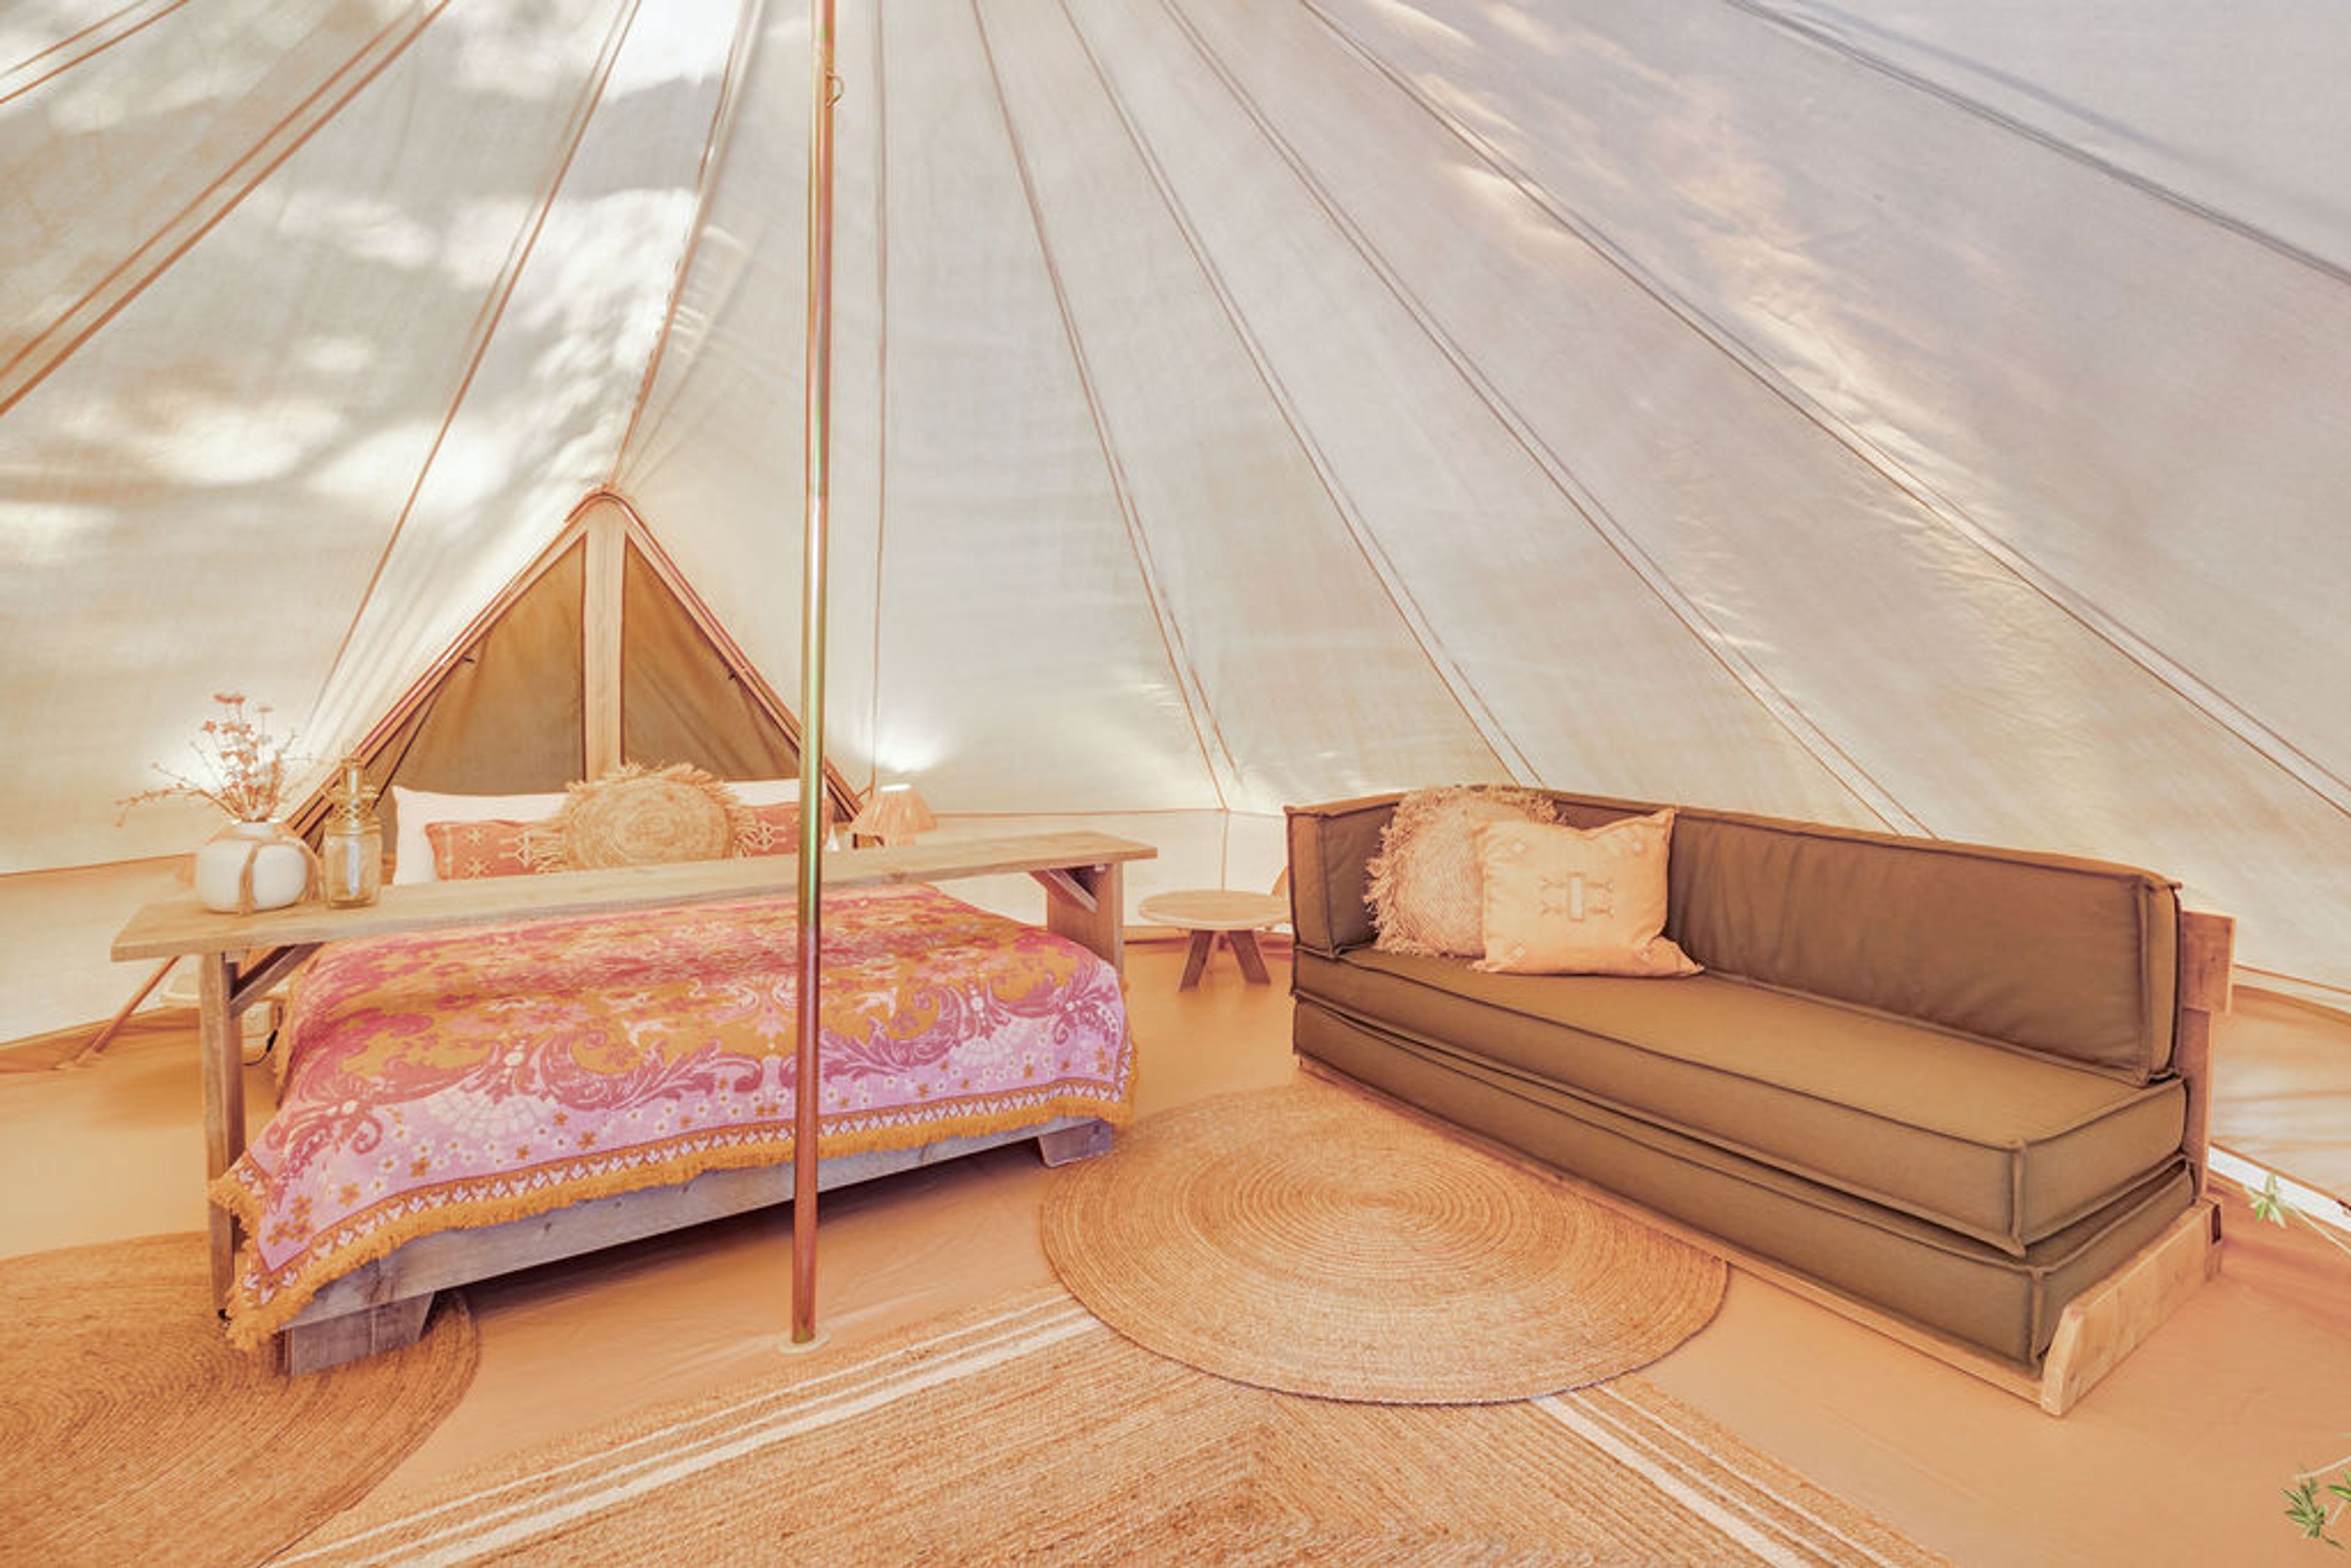 Byron Bay Bell Tent - Sleeps 2 couch bed